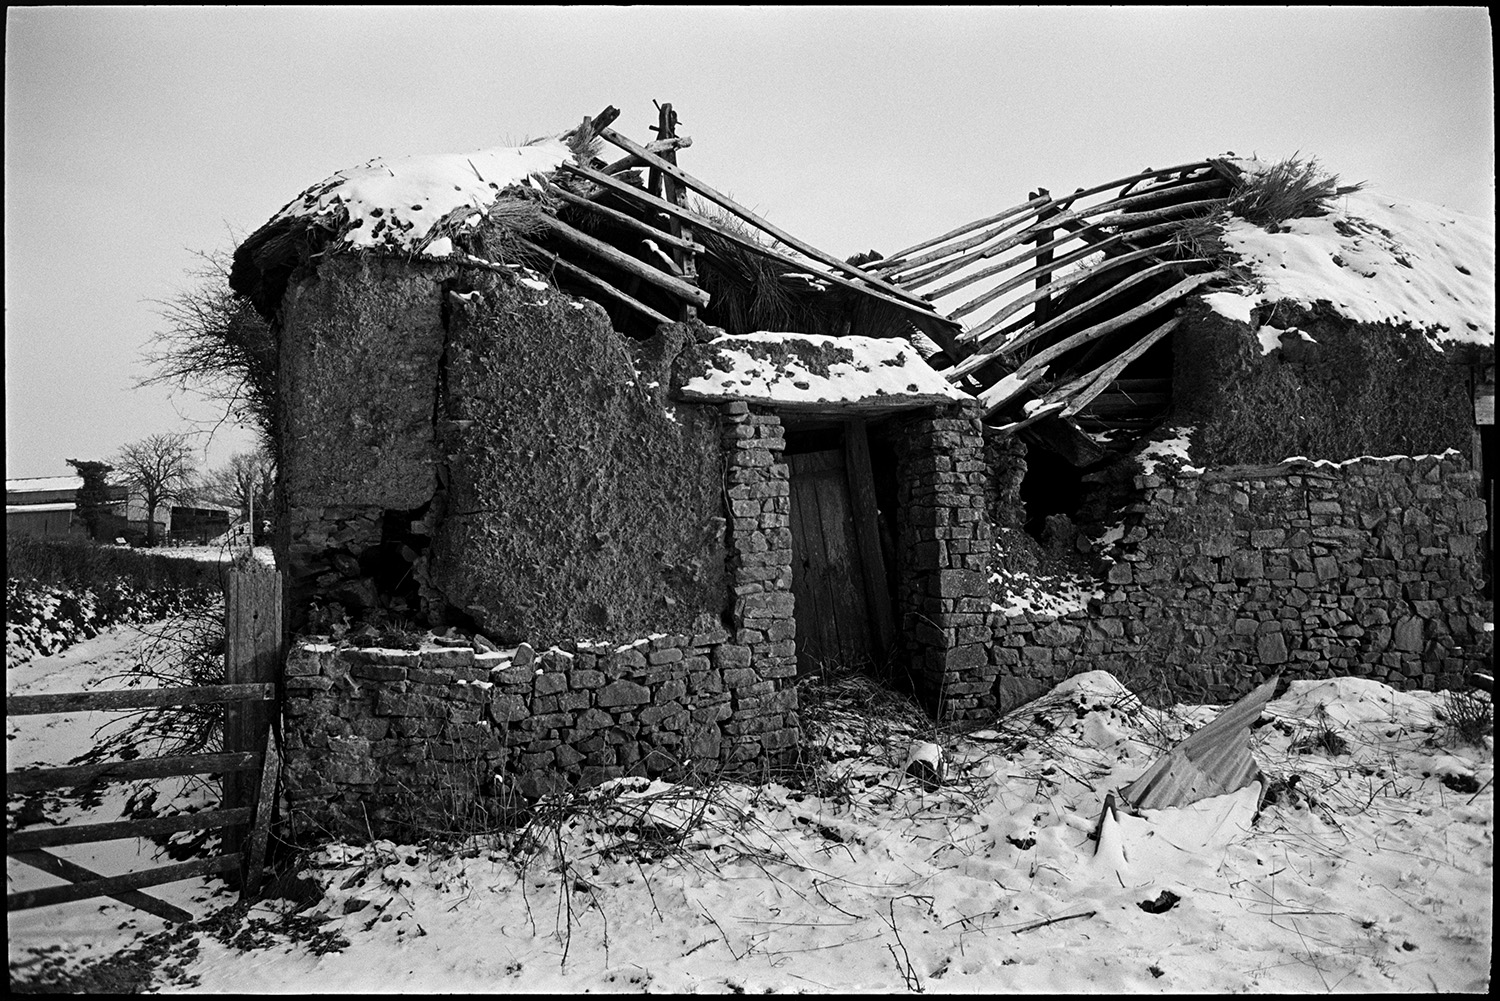 Snow, collapsing cob and thatch barns.
[The stone entrance of a collapsing cob and thatch barn in a field covered in snow at Middle Week, Iddesleigh. The roof timbers of the barn are exposed. Farm buildings can be seen in the background.]